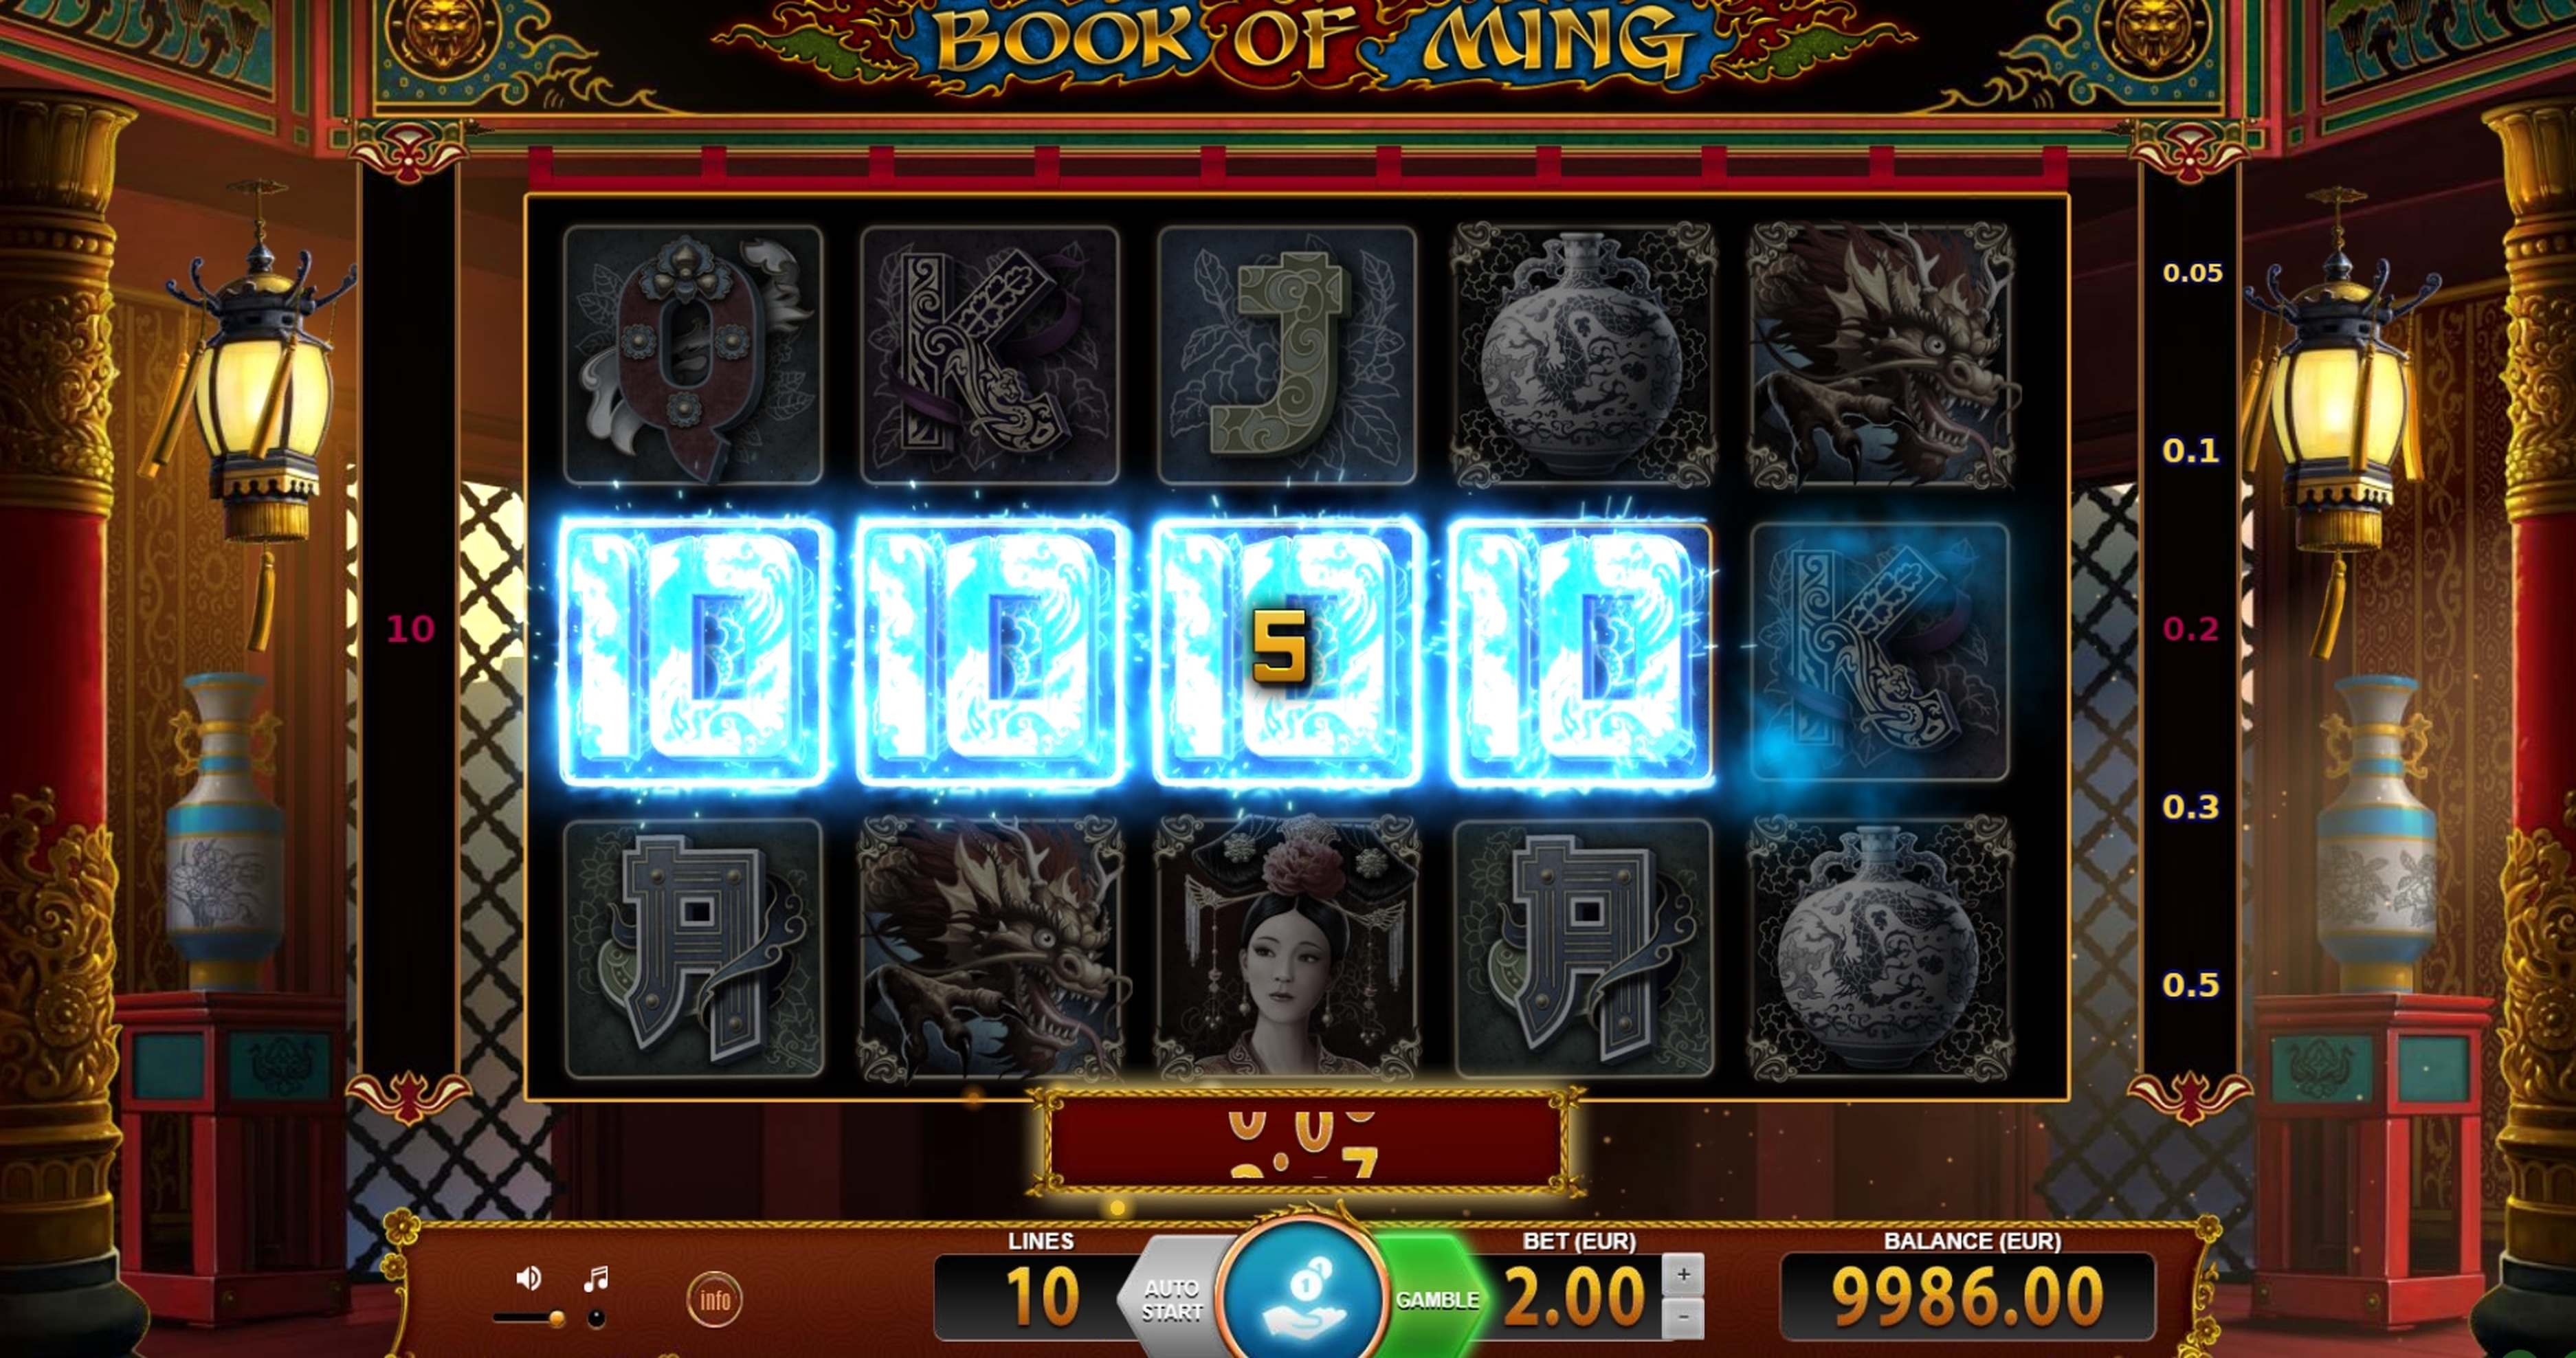 Win Money in Book of Ming Free Slot Game by BF Games